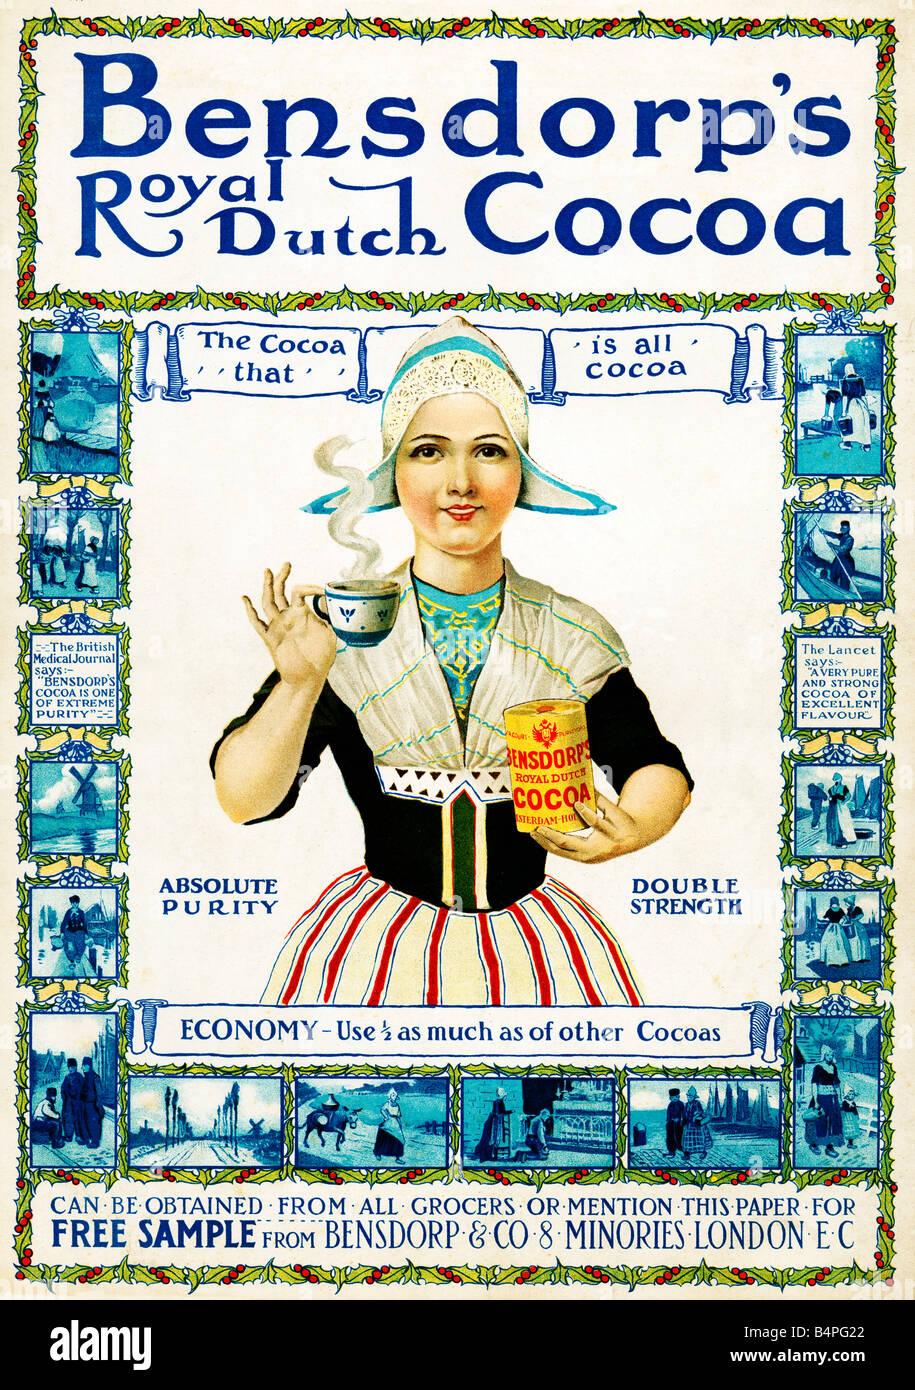 Bensdorps Royal Dutch Cocoa 1907 English magazine advert for the Cocoa that is all Cocoa from Holland Stock Photo